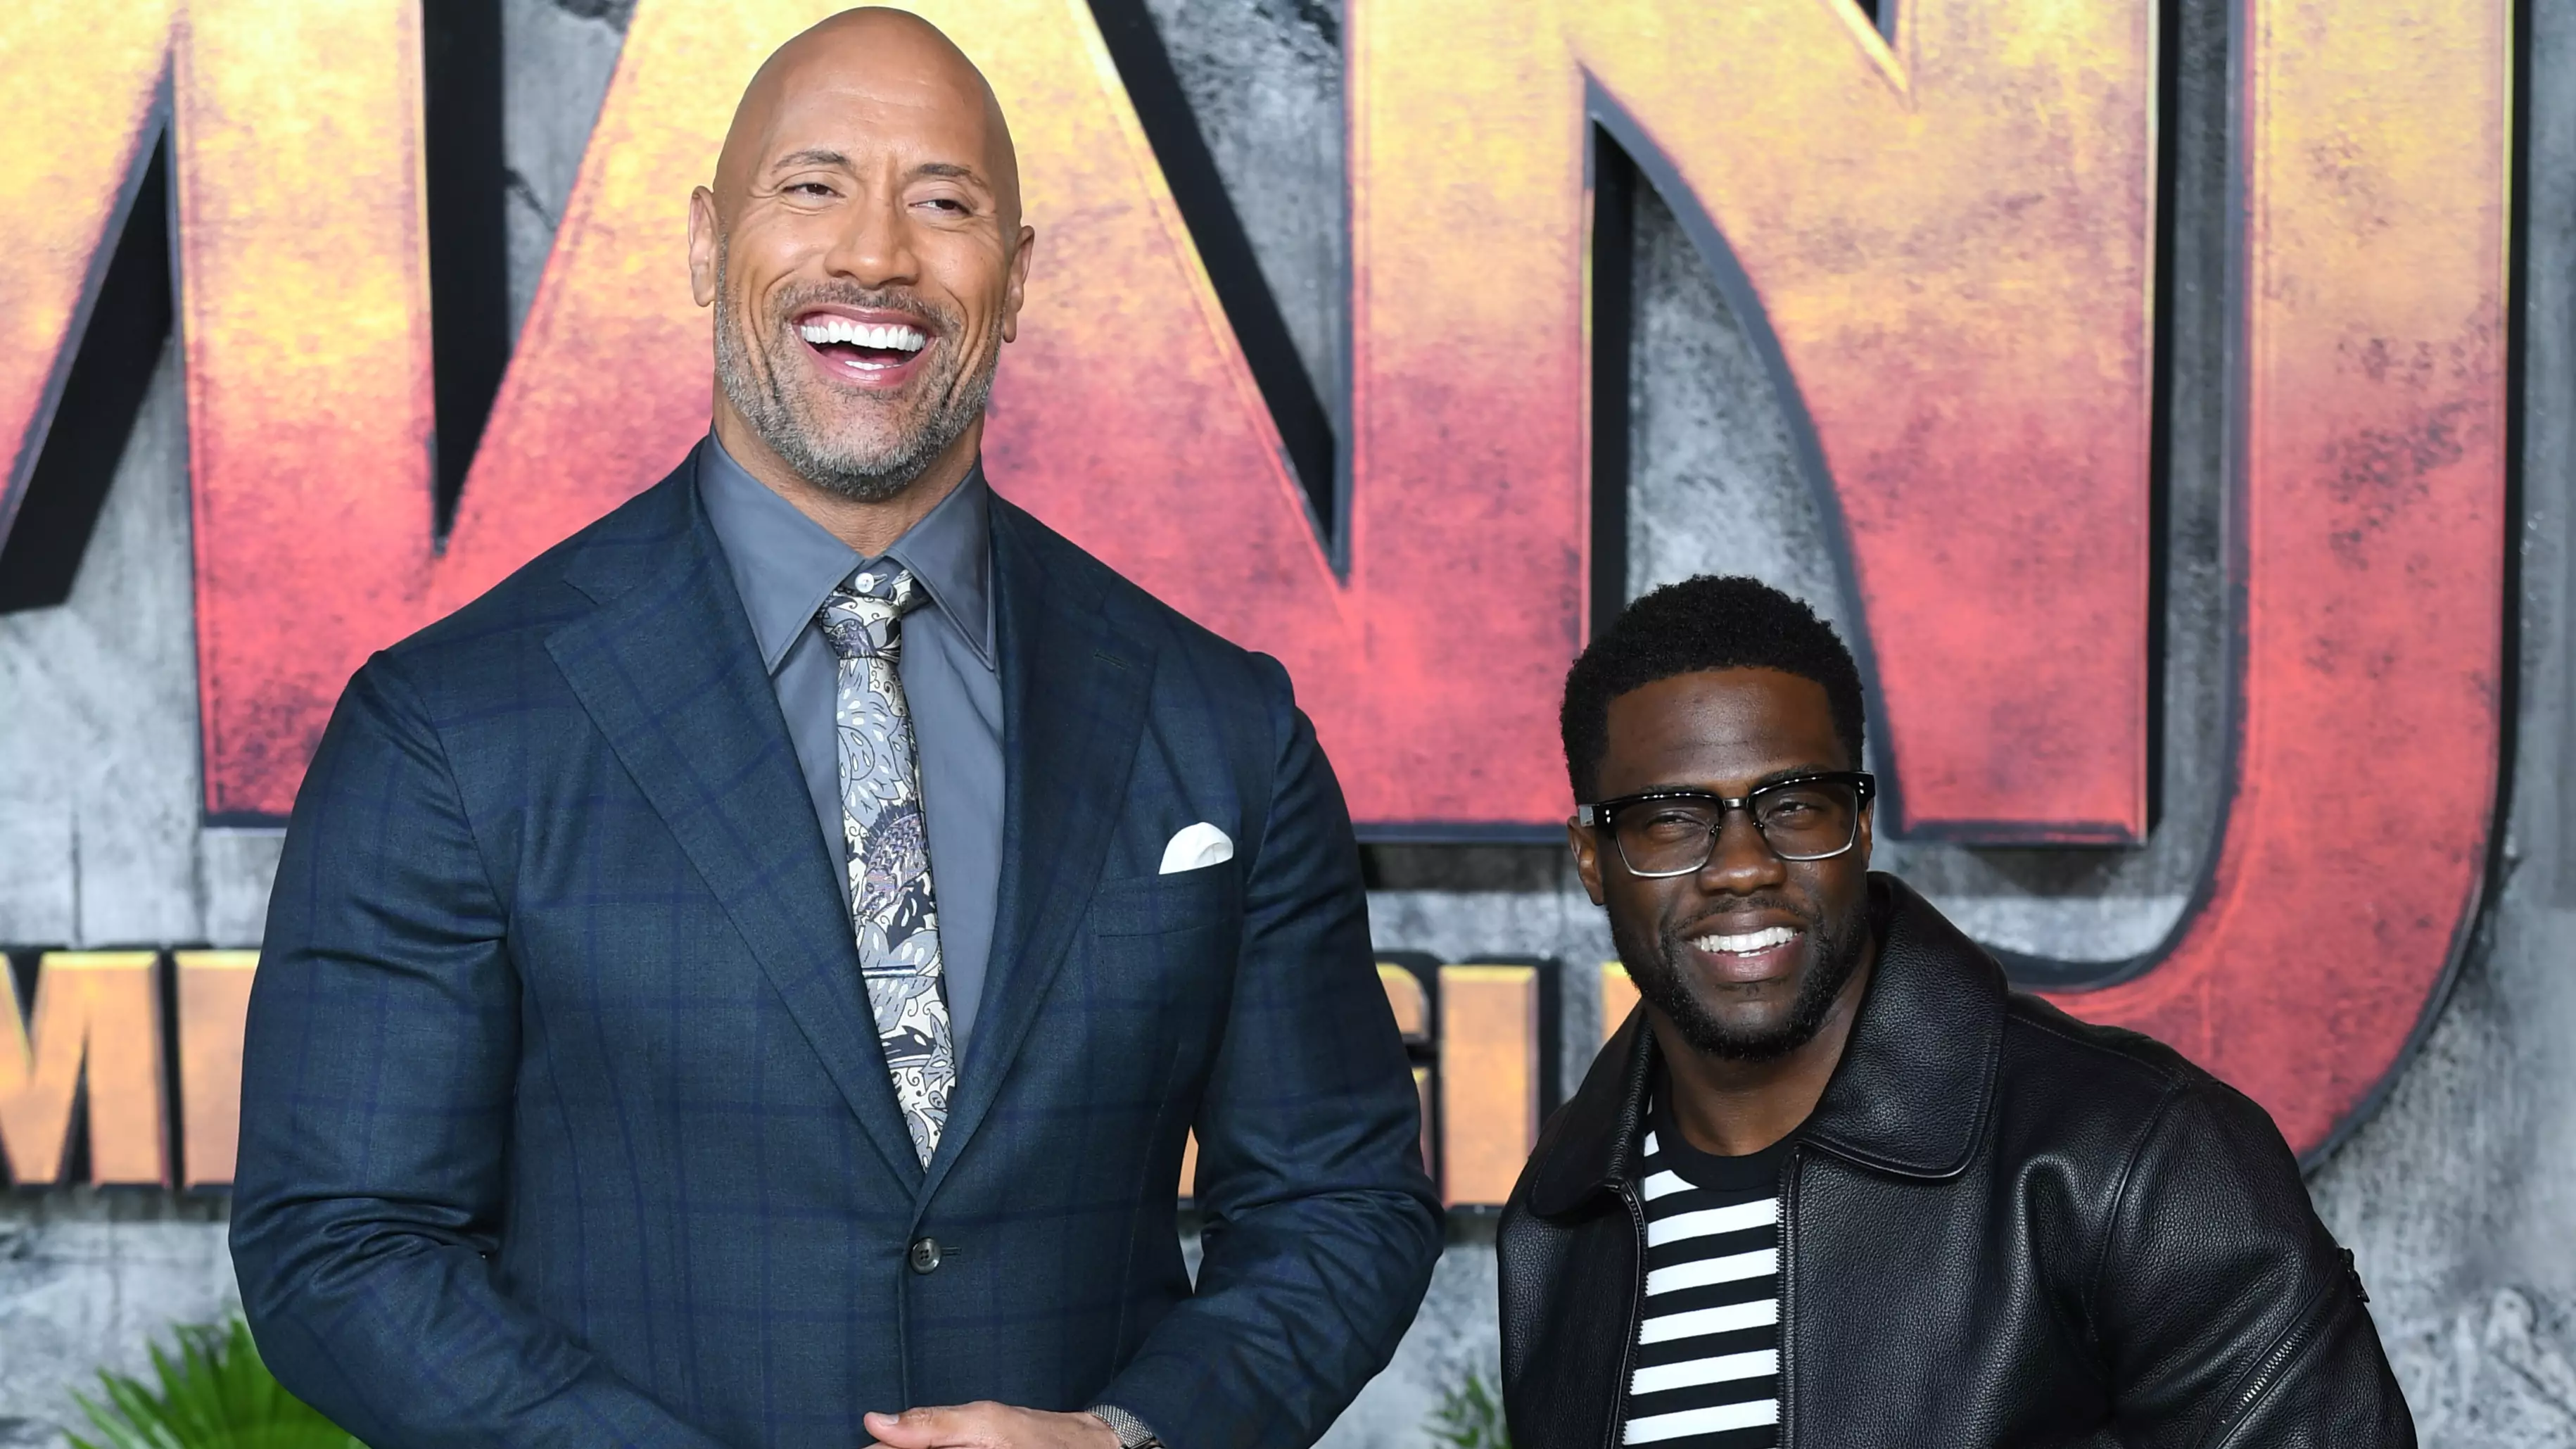 Dwayne Johnson Ends Honeymoon Early To Support Kevin Hart After Car Accident